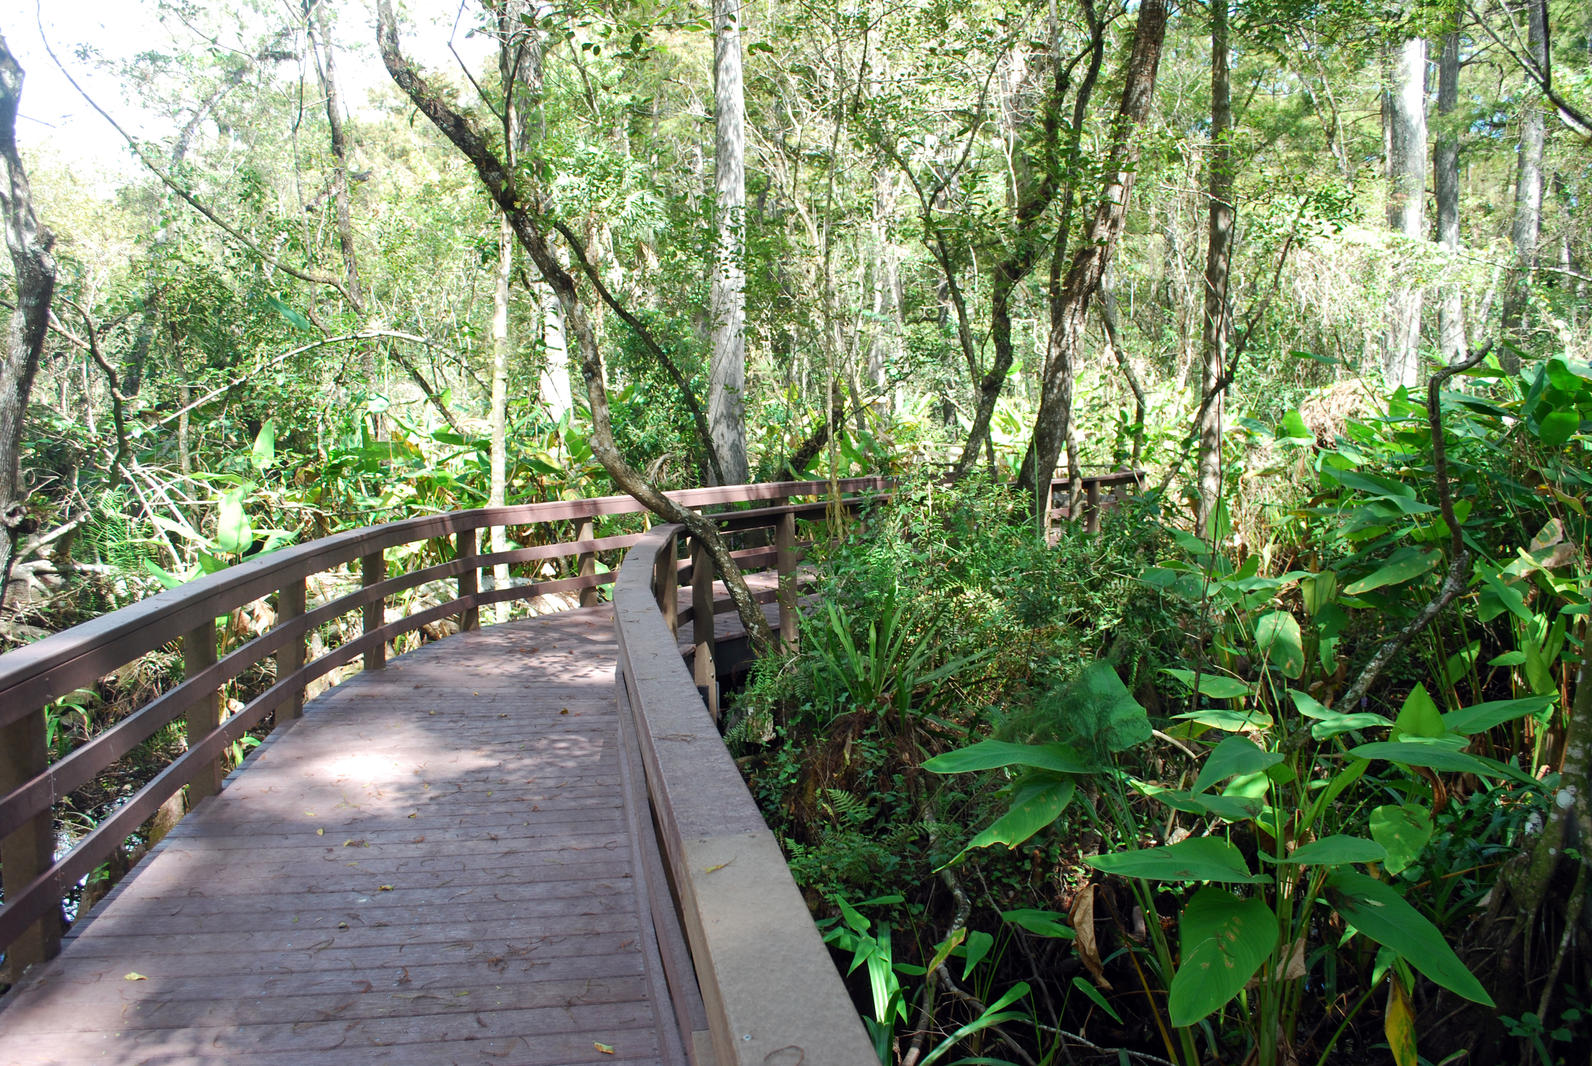 Photo of a boardwalk in the swamp using synthetic material.